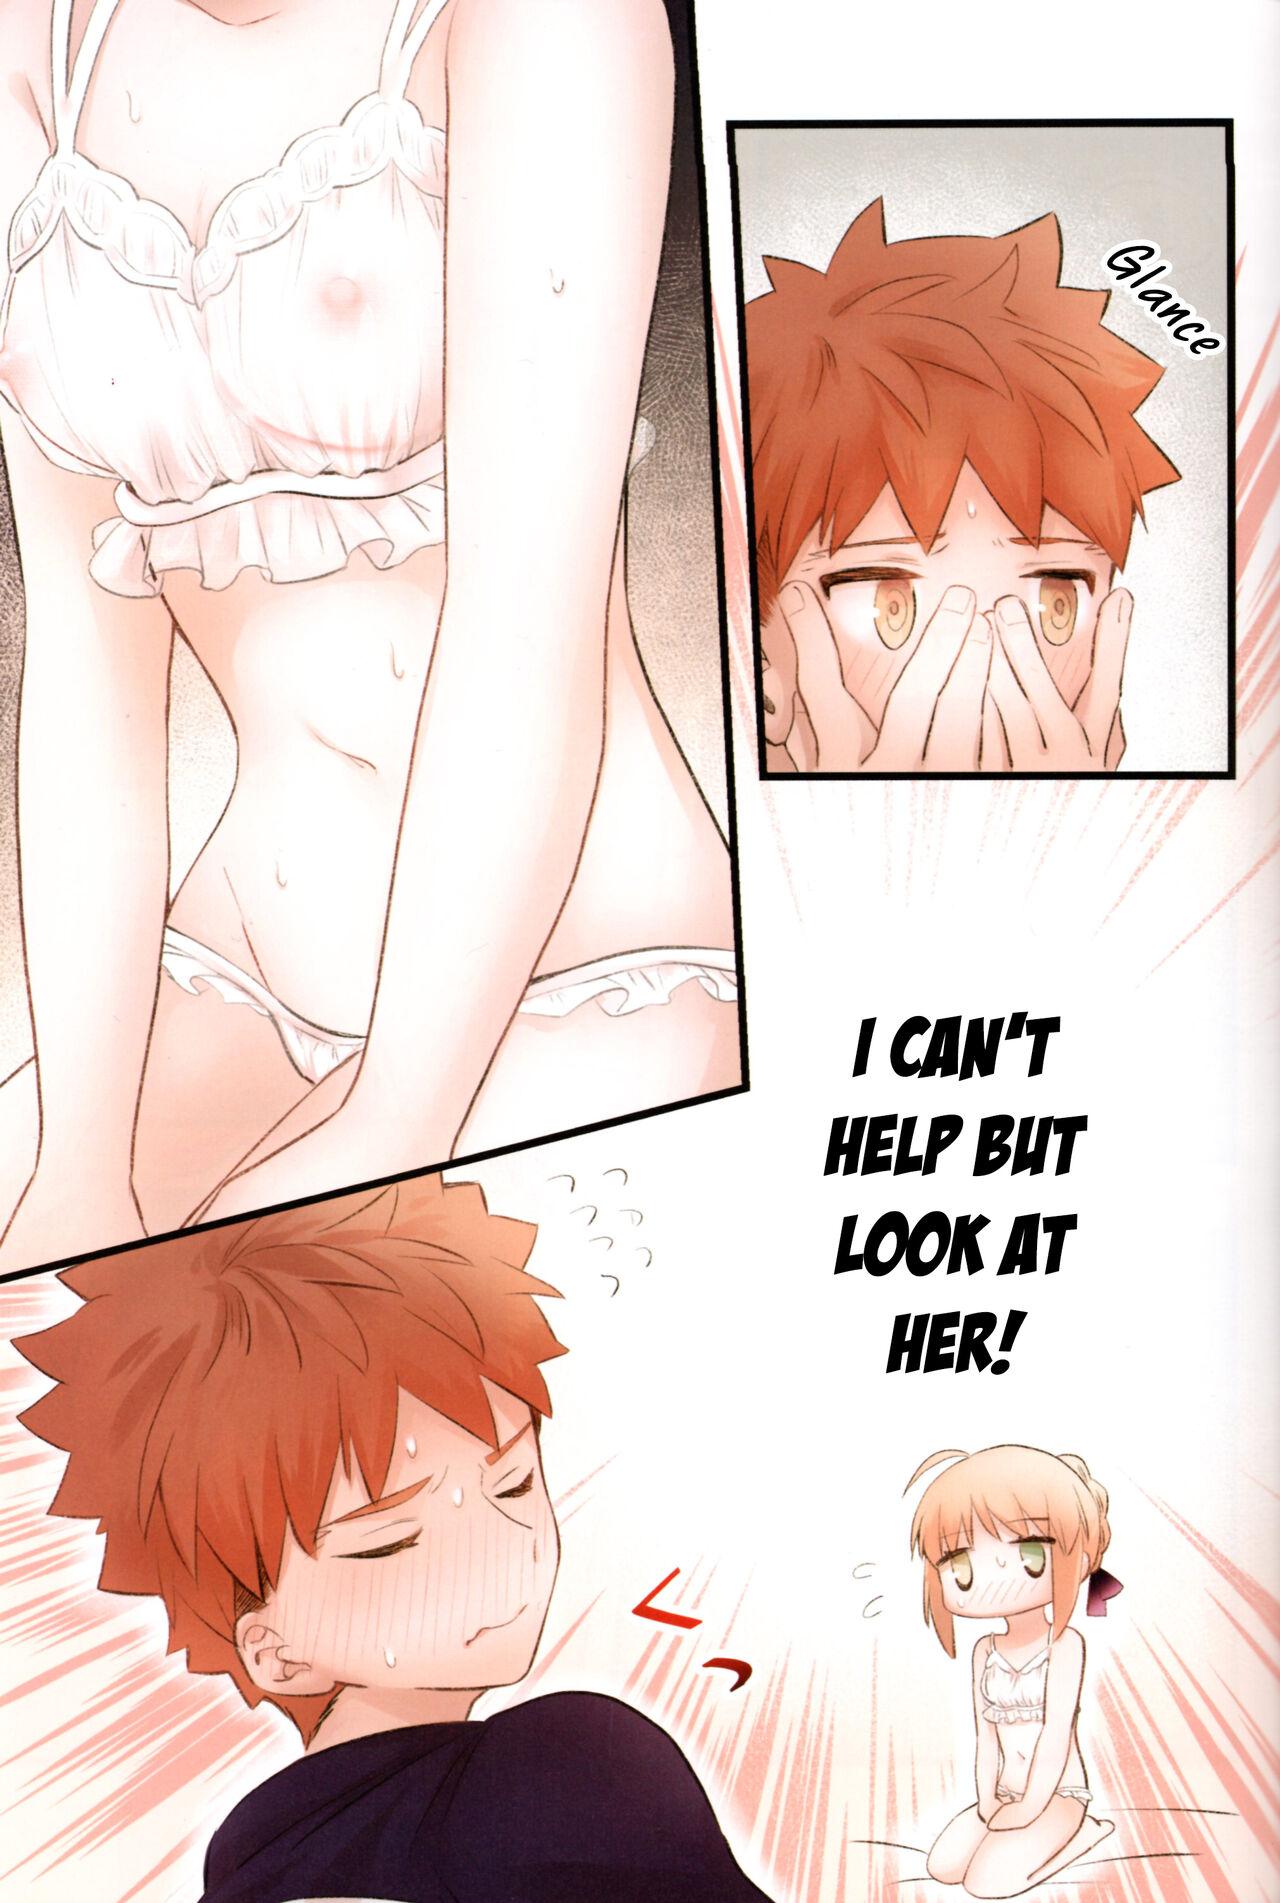 Ohmibod Souiu Shitagi wa Ore ni wa Hayai | This kind of underwear is too much for me. - Fate stay night First Time - Page 8